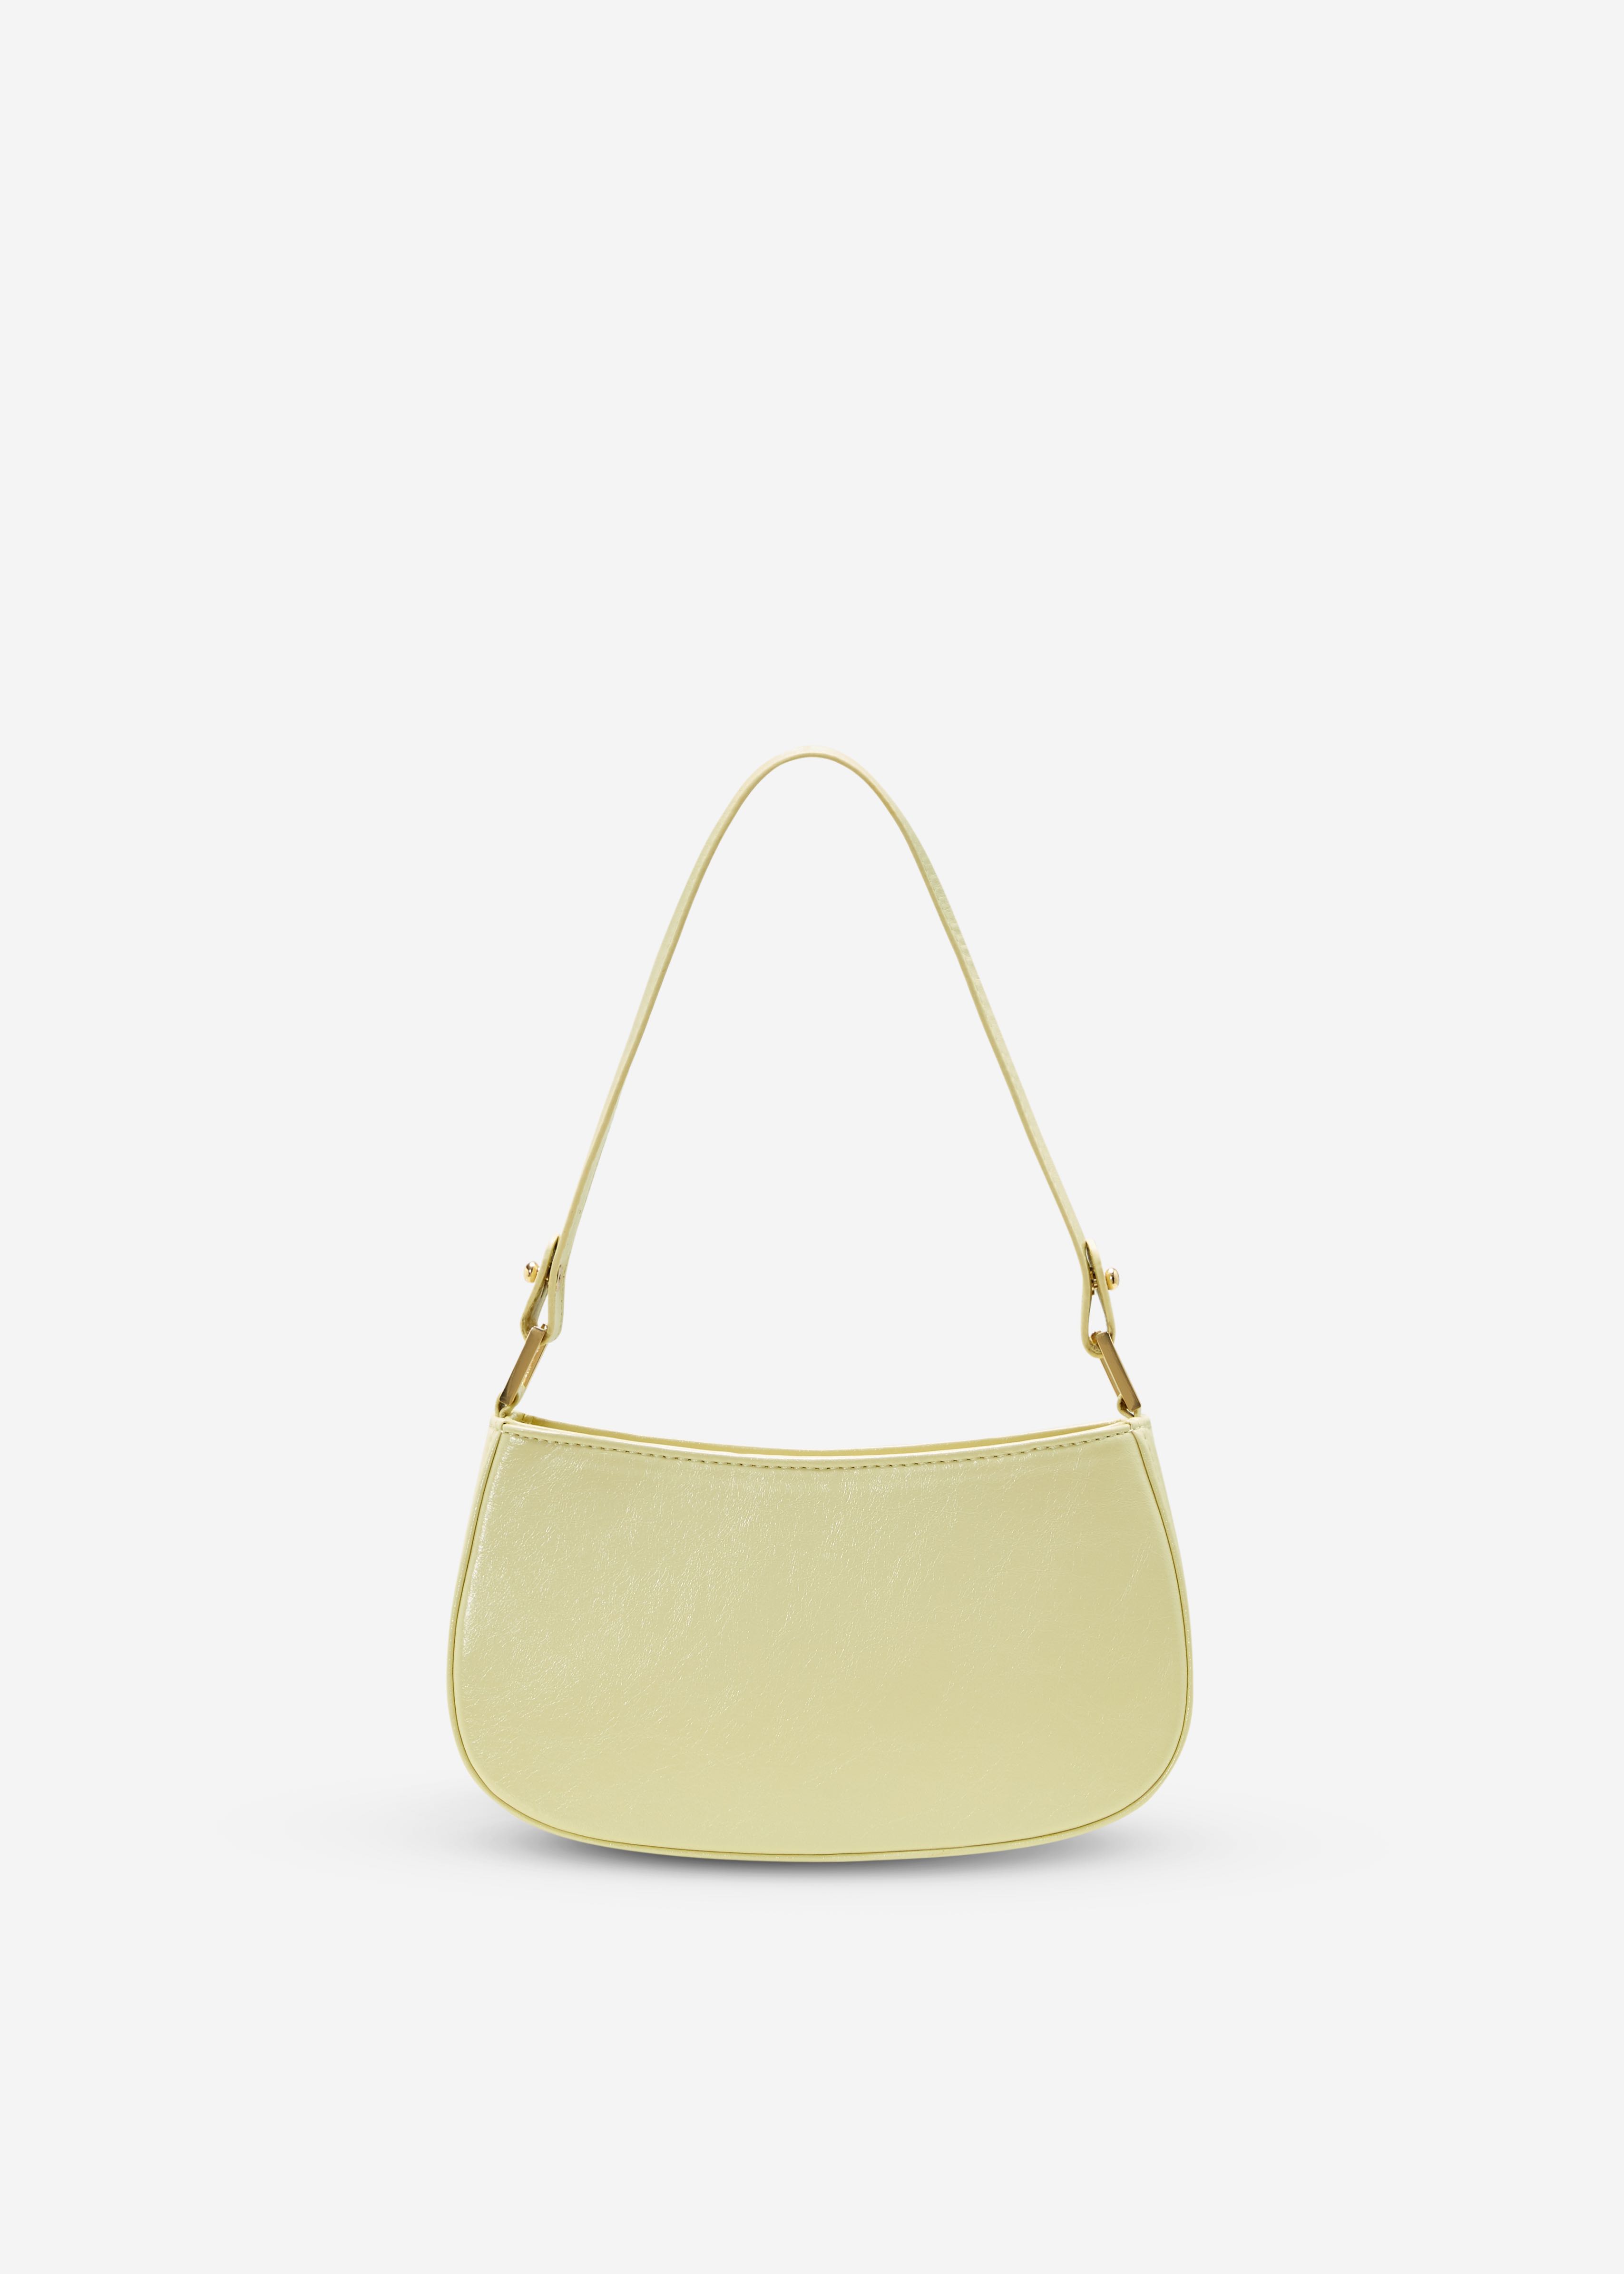 Peggy in Pastel Yellow | LINE SHOPPING